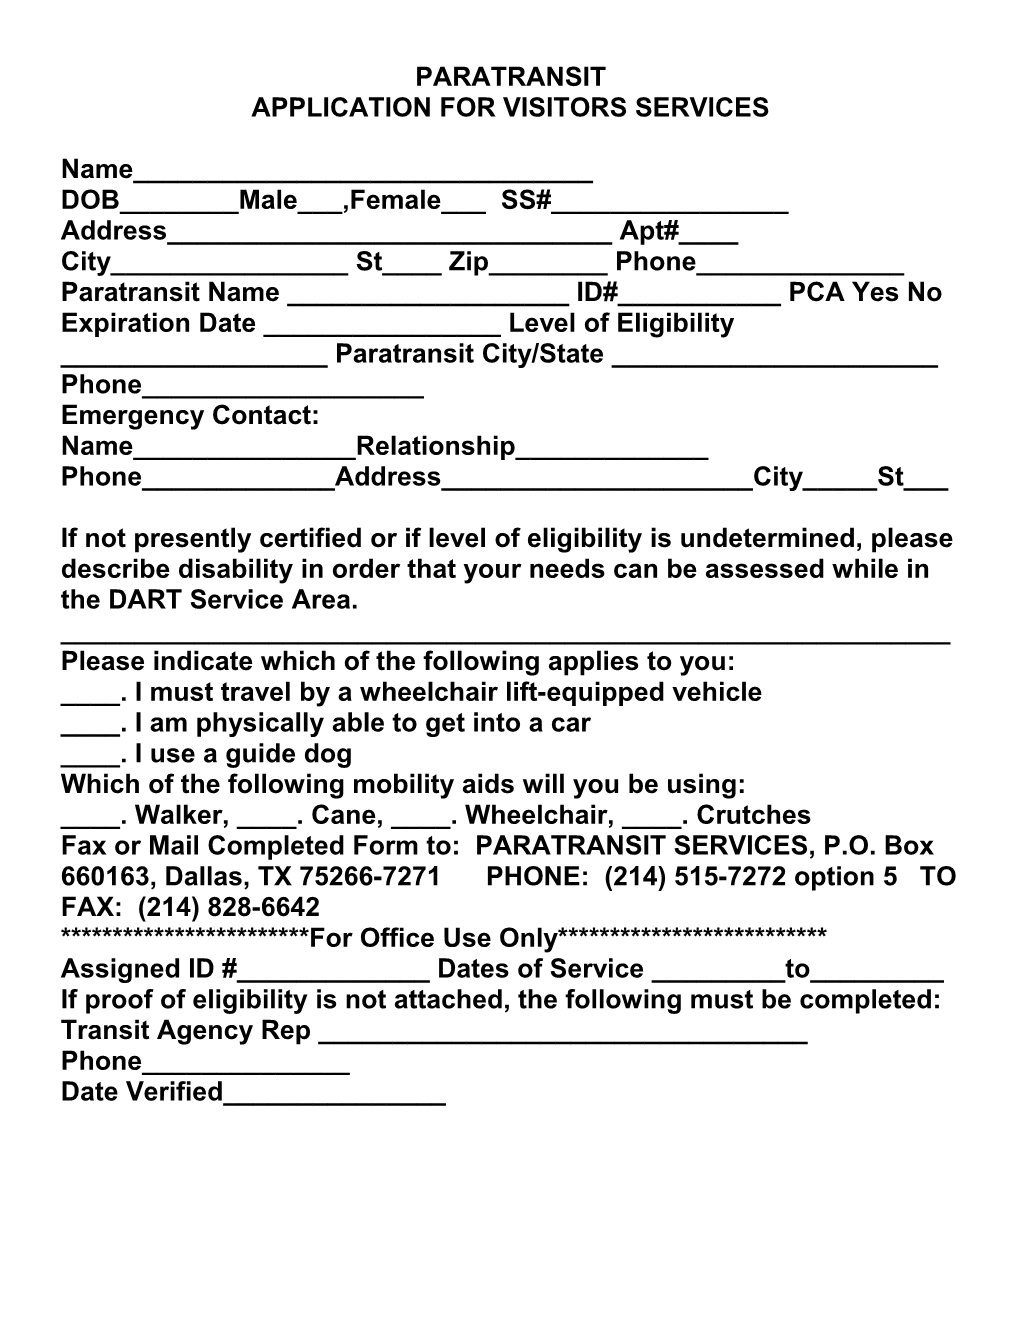 Application for Visitors Services